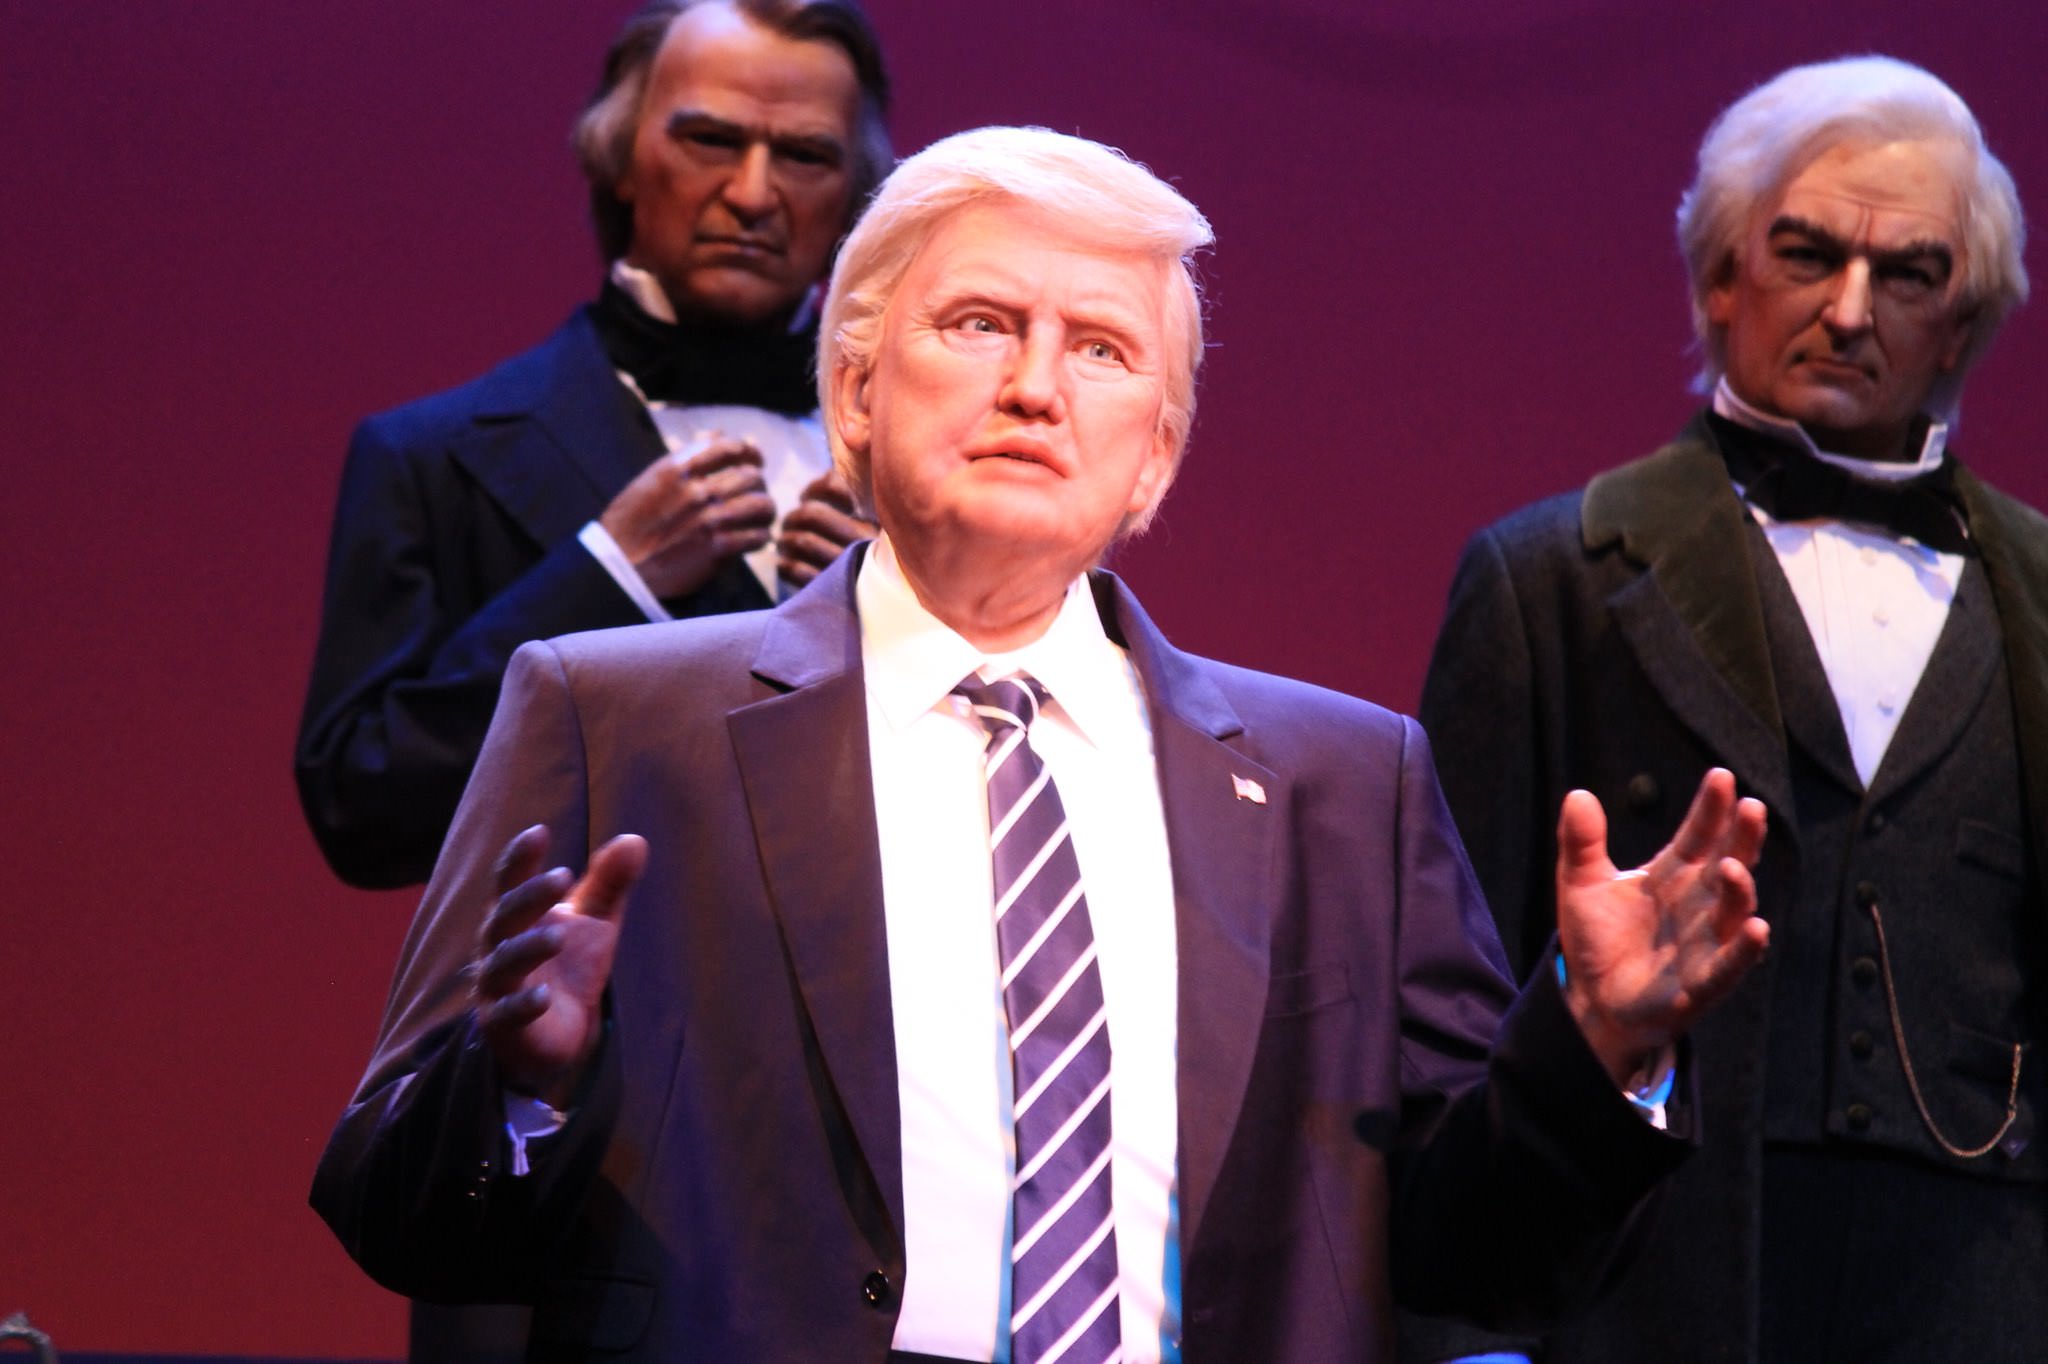 Disney clearly designed a Hillary animatronic first and had to repurpose it for Trump